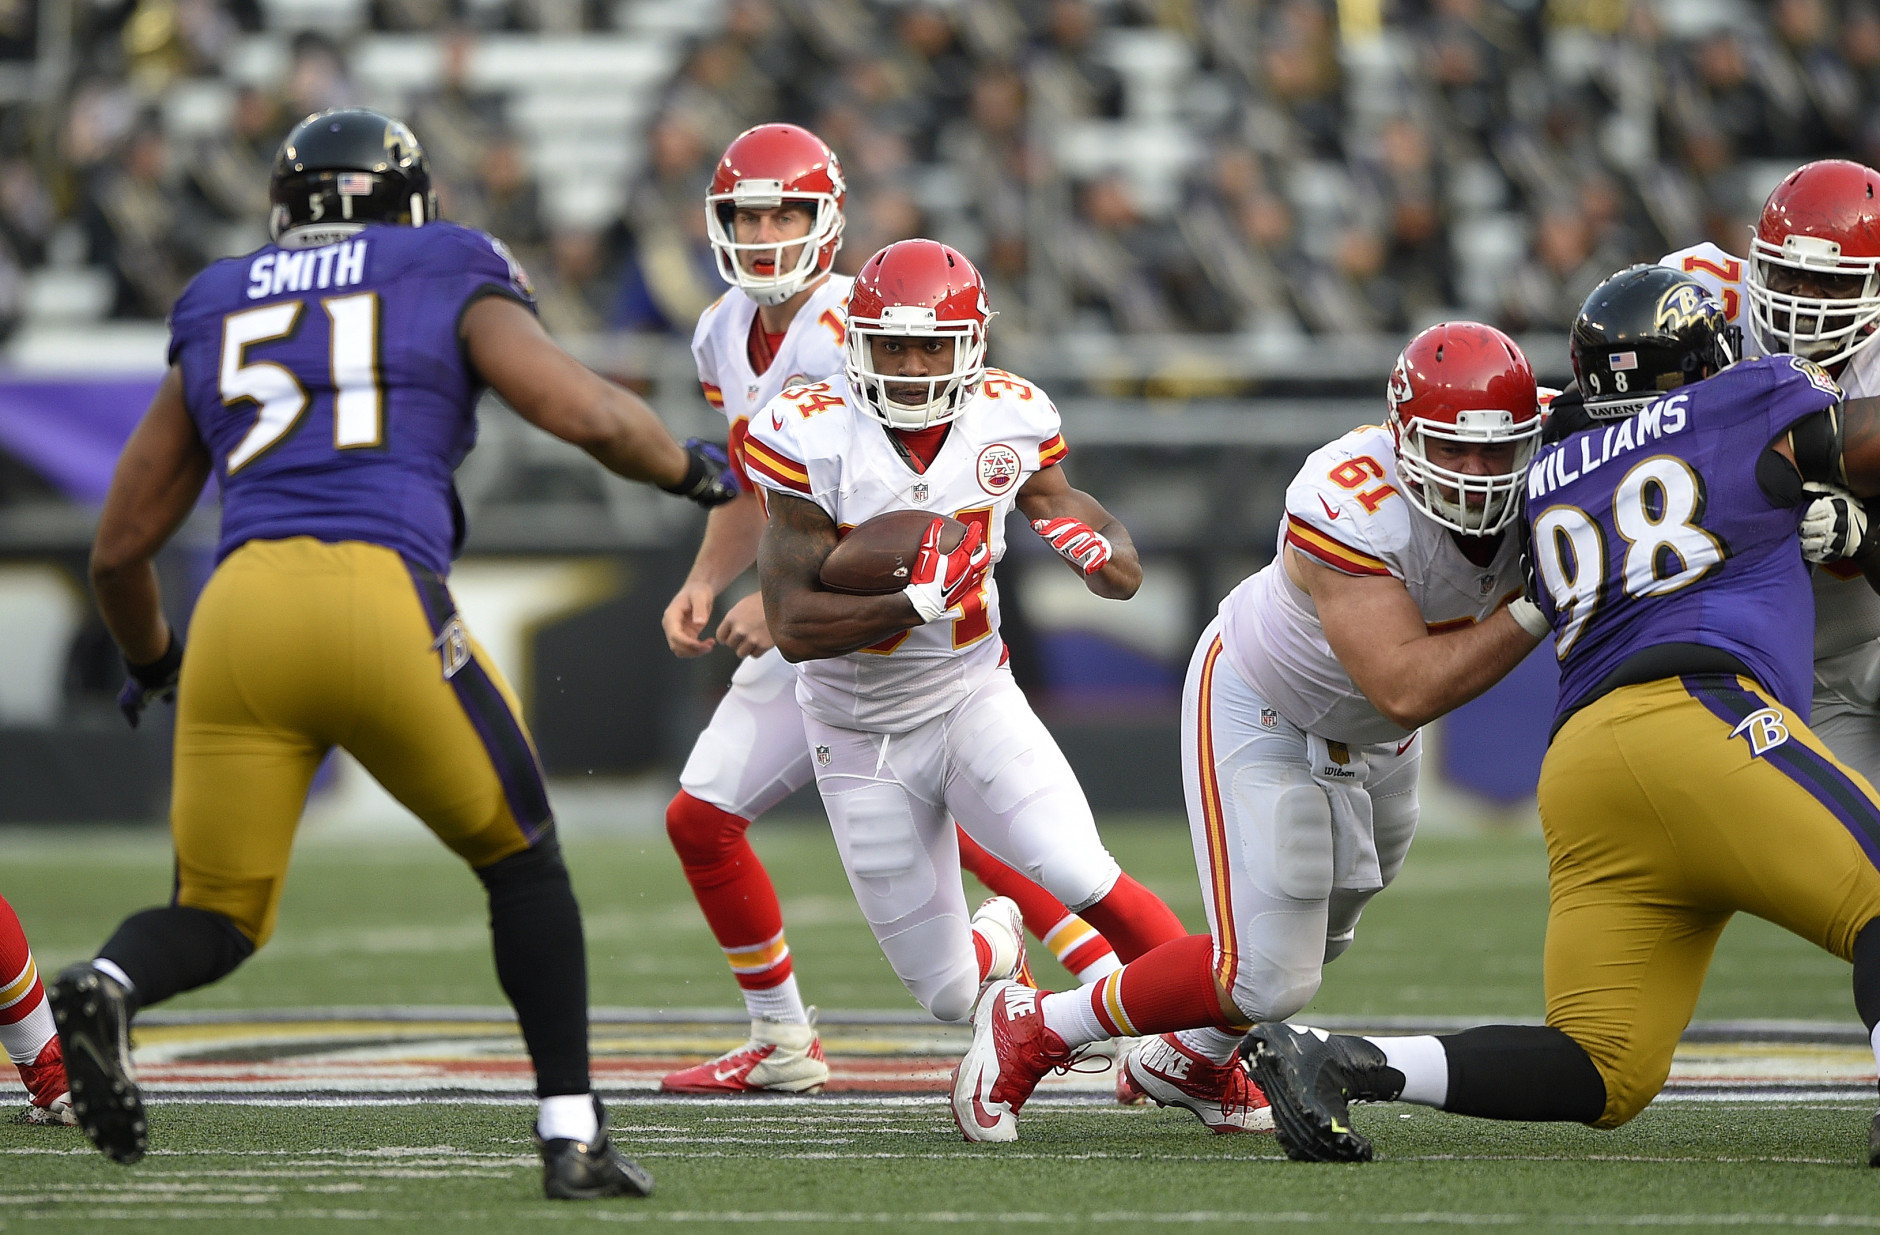 Kansas City Chiefs running back Knile Davis (34) rushes the ball after taking a handoff from Kansas City Chiefs quarterback Alex Smith, back center, in the second half of an NFL football game against the Baltimore Ravens, Sunday, Dec. 20, 2015, in Baltimore. Kansas City won 34-14. (AP Photo/Nick Wass)